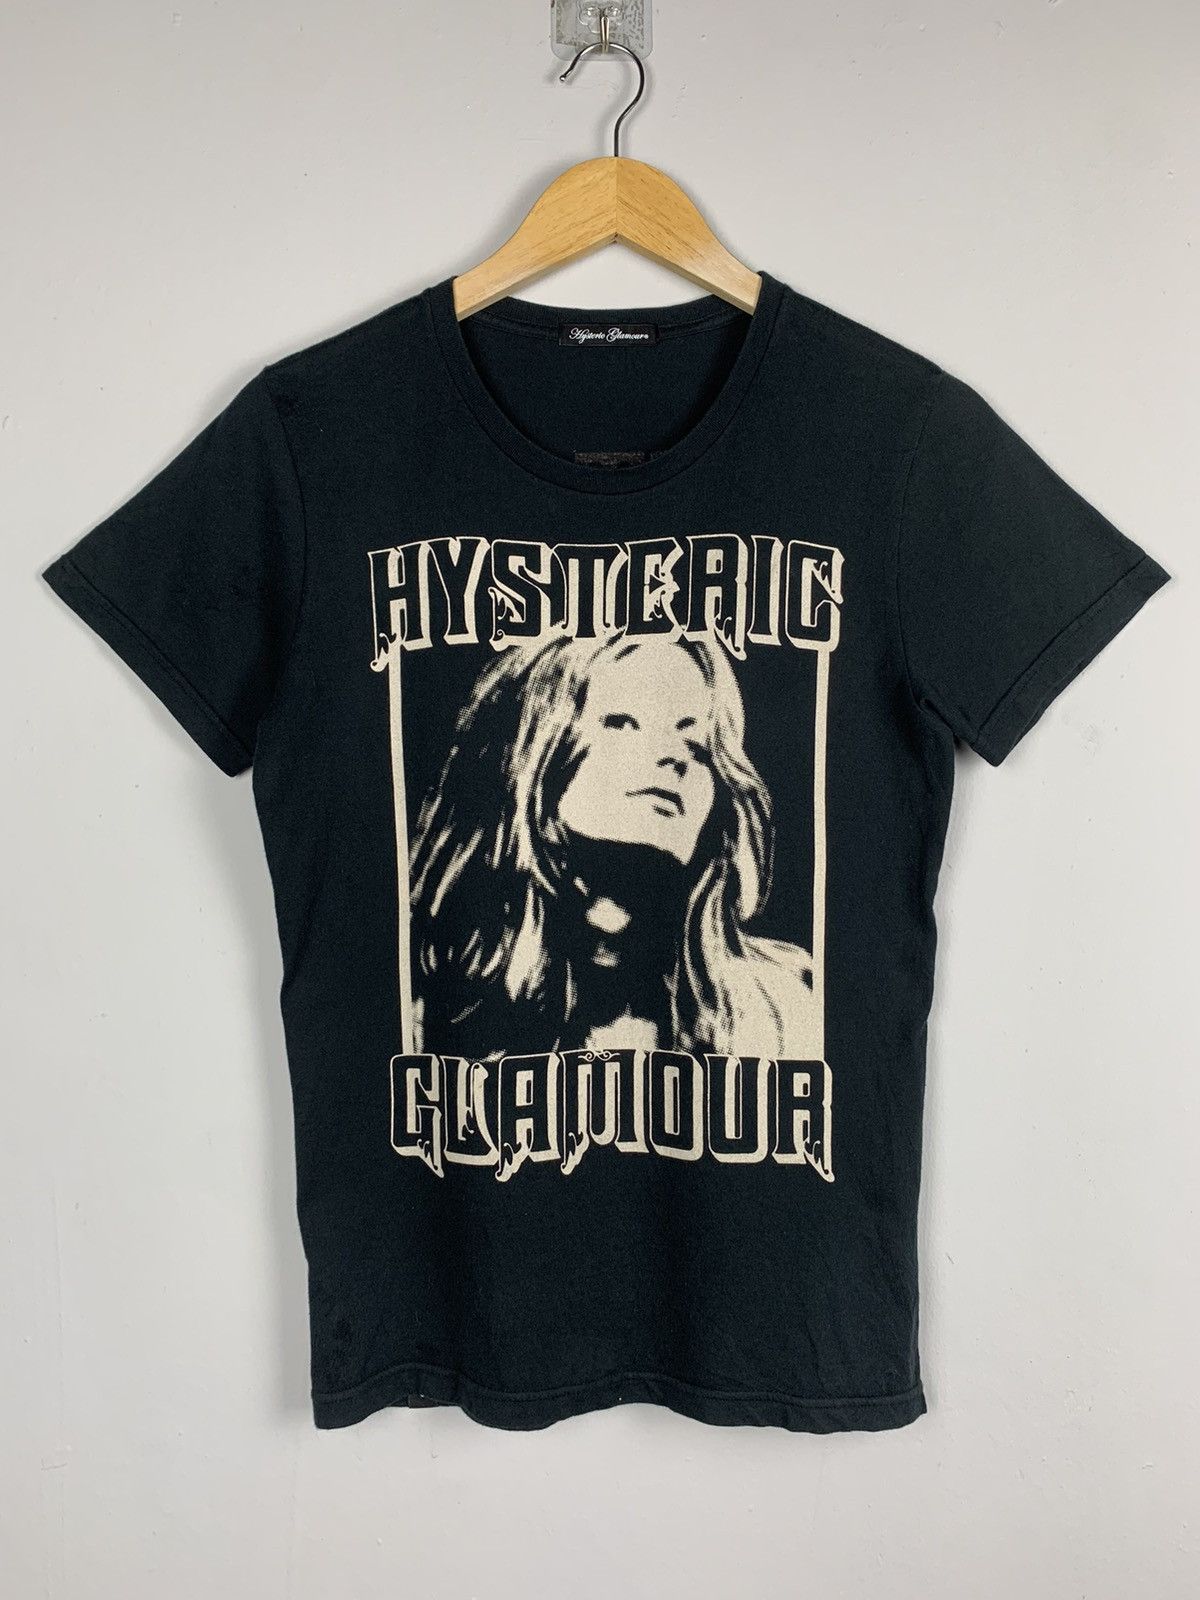 Hysteric Glamour Hysteric Glamour 'Contort Yourself' shirt | Grailed